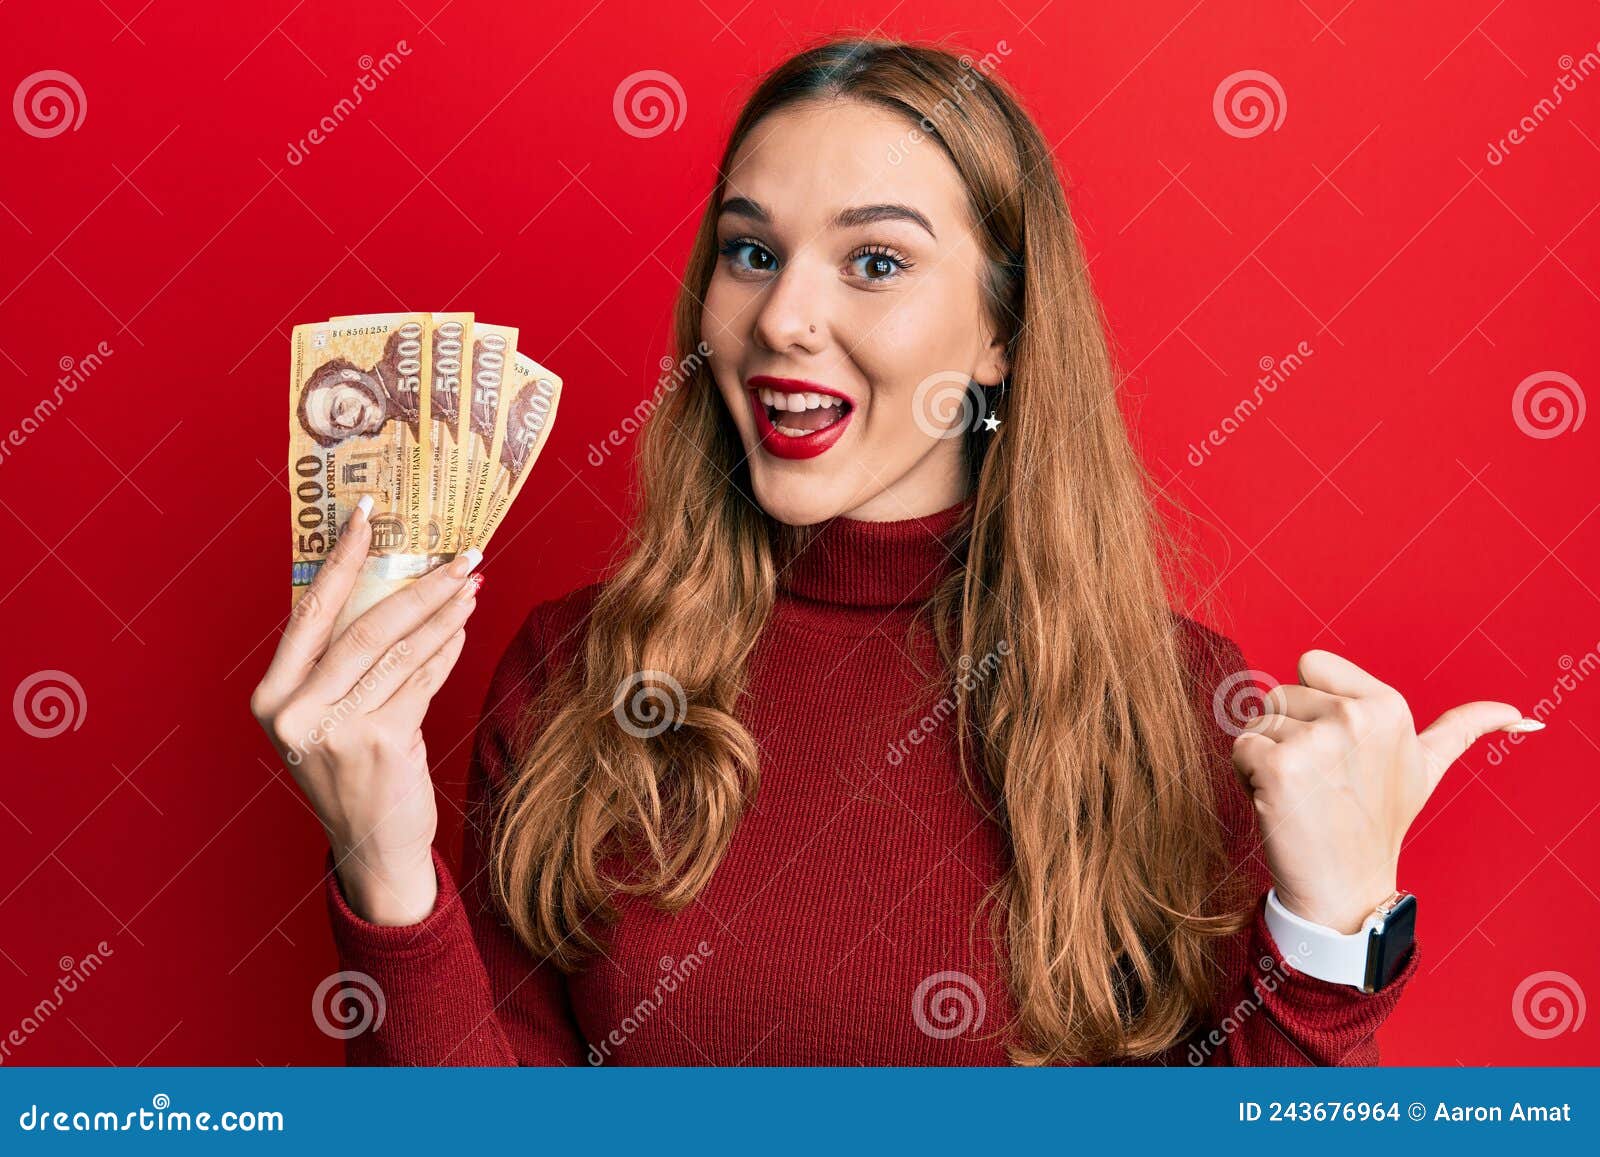 Young Blonde Woman Holding 5000 Hungarian Forint Banknotes Pointing Thumb Up To The Side Smiling